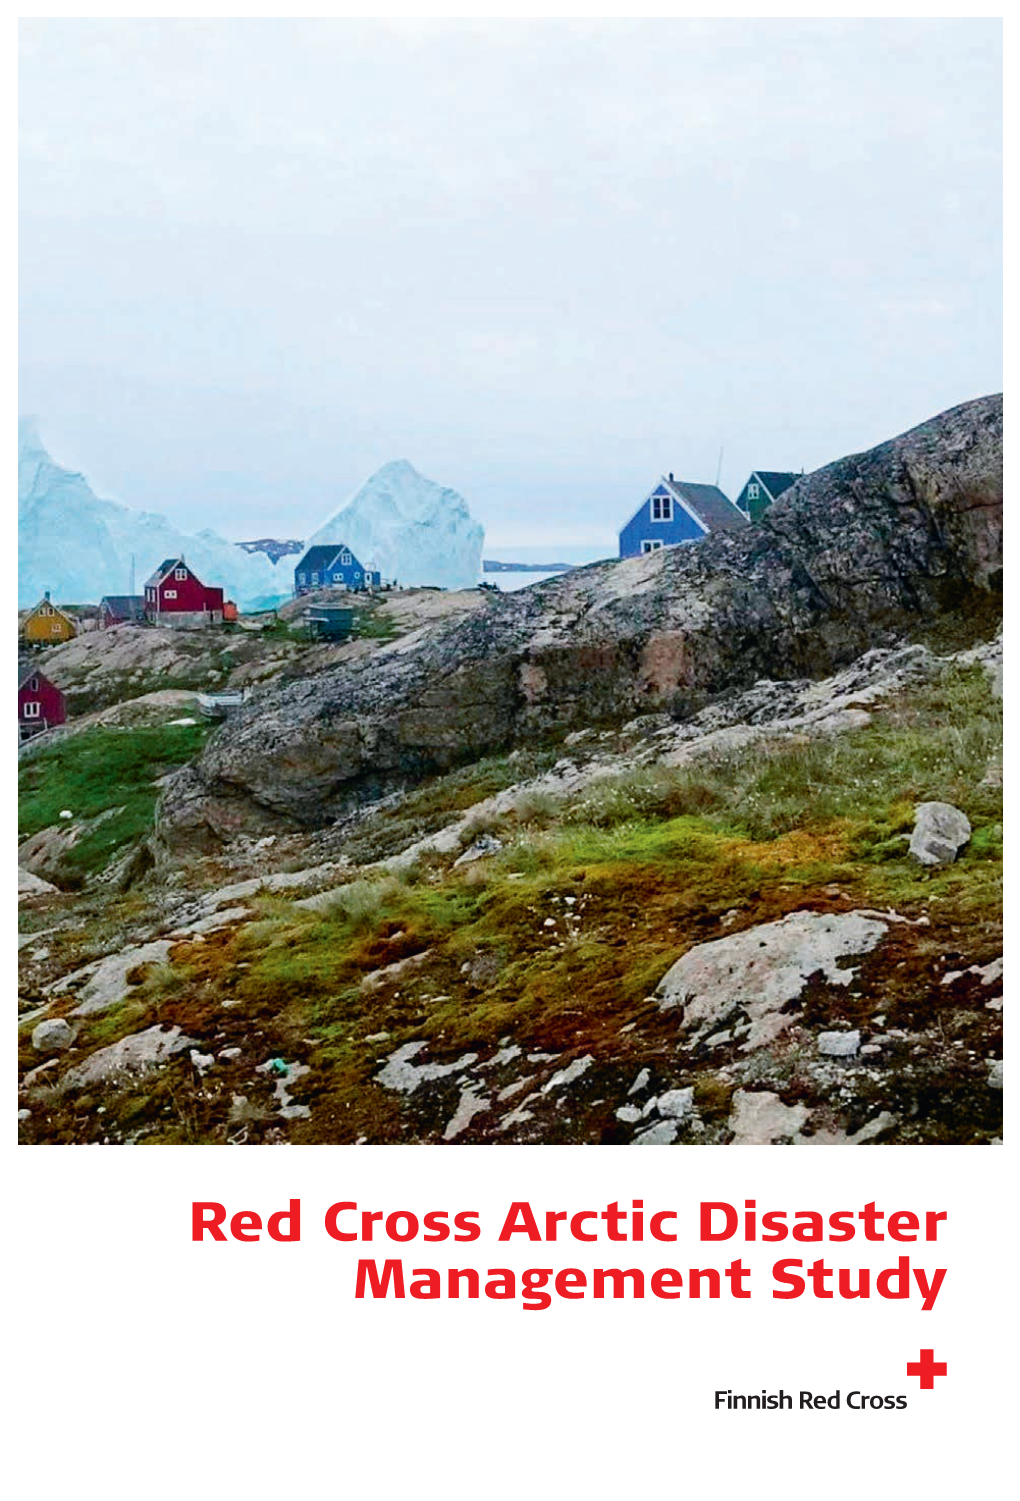 Red Cross Arctic Disaster Management Study